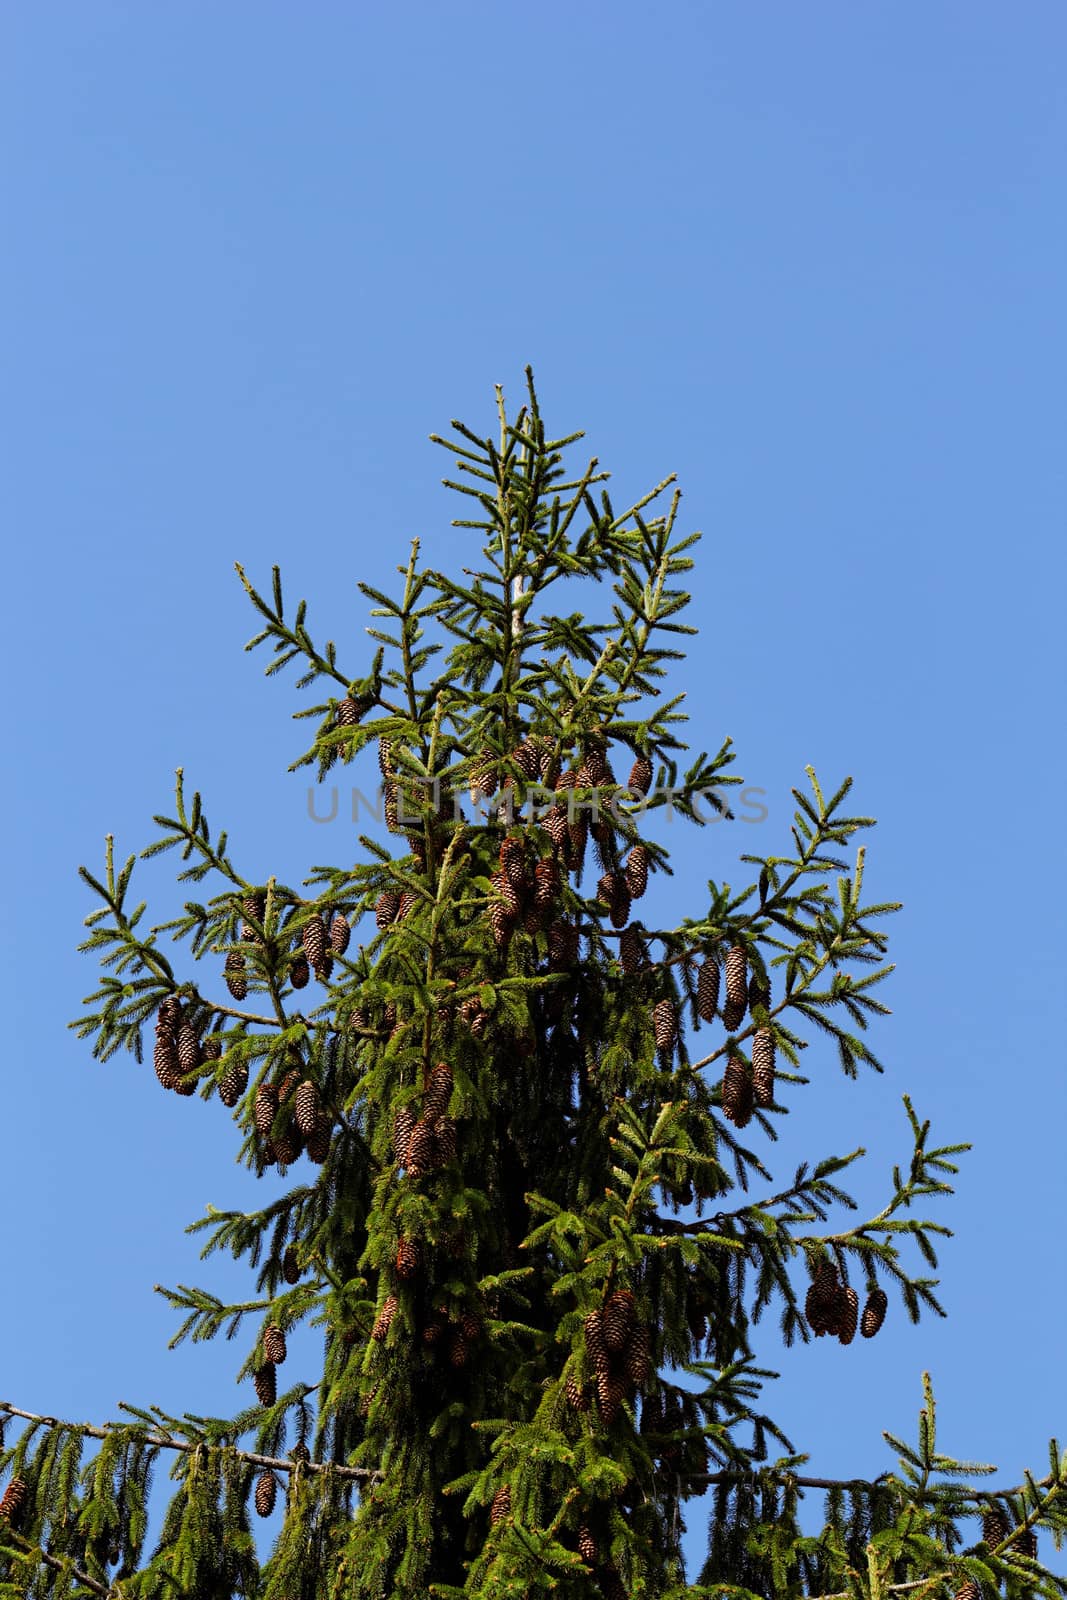 pine tree with fresh pine shoots and red pinecones